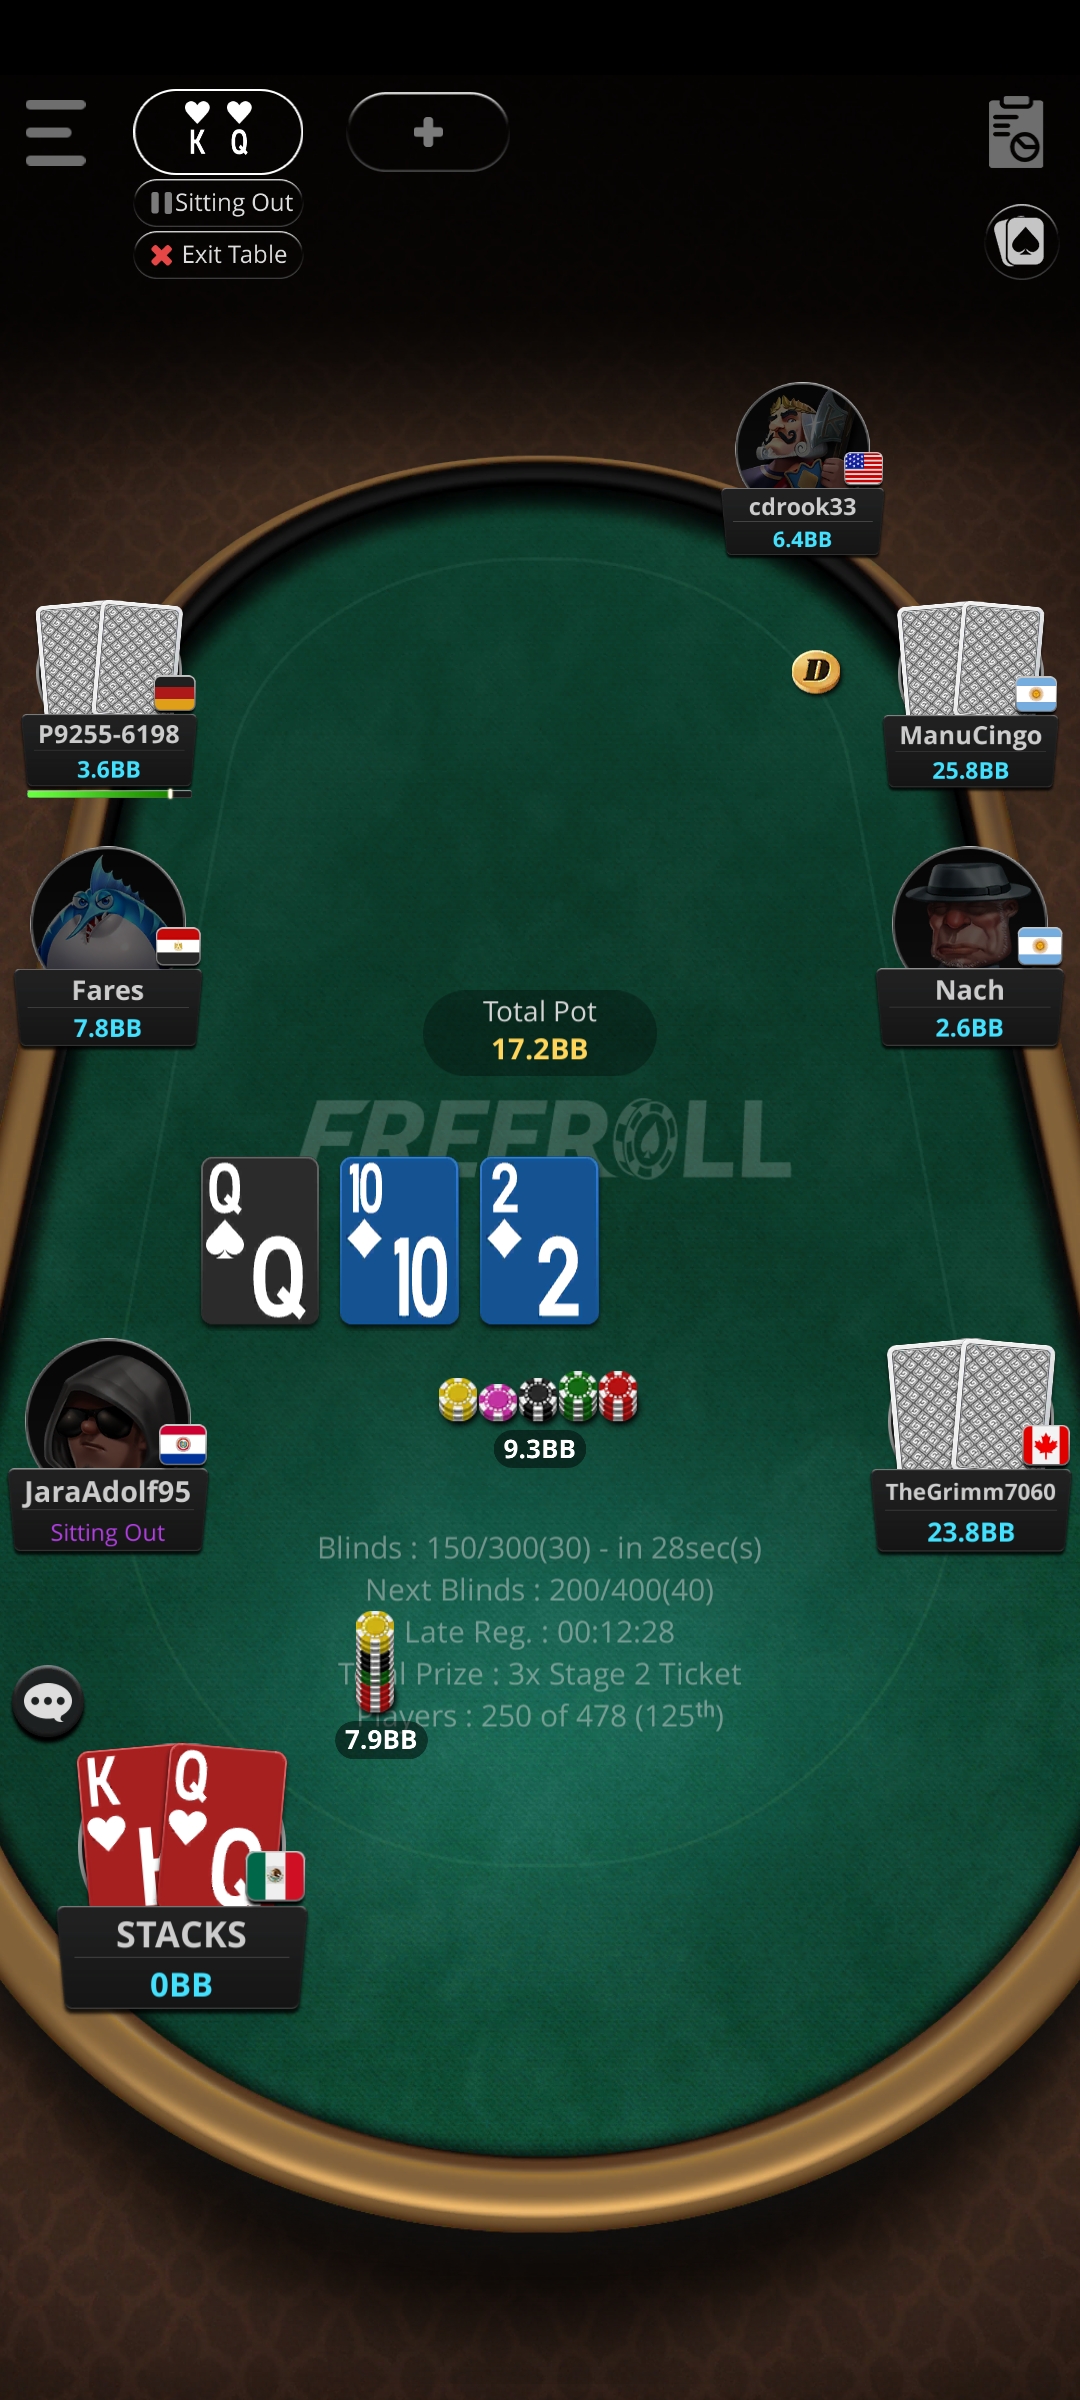 Time on Your Hands? ClubGG Provides US Players a Long but Legit Pathway to the WSOP